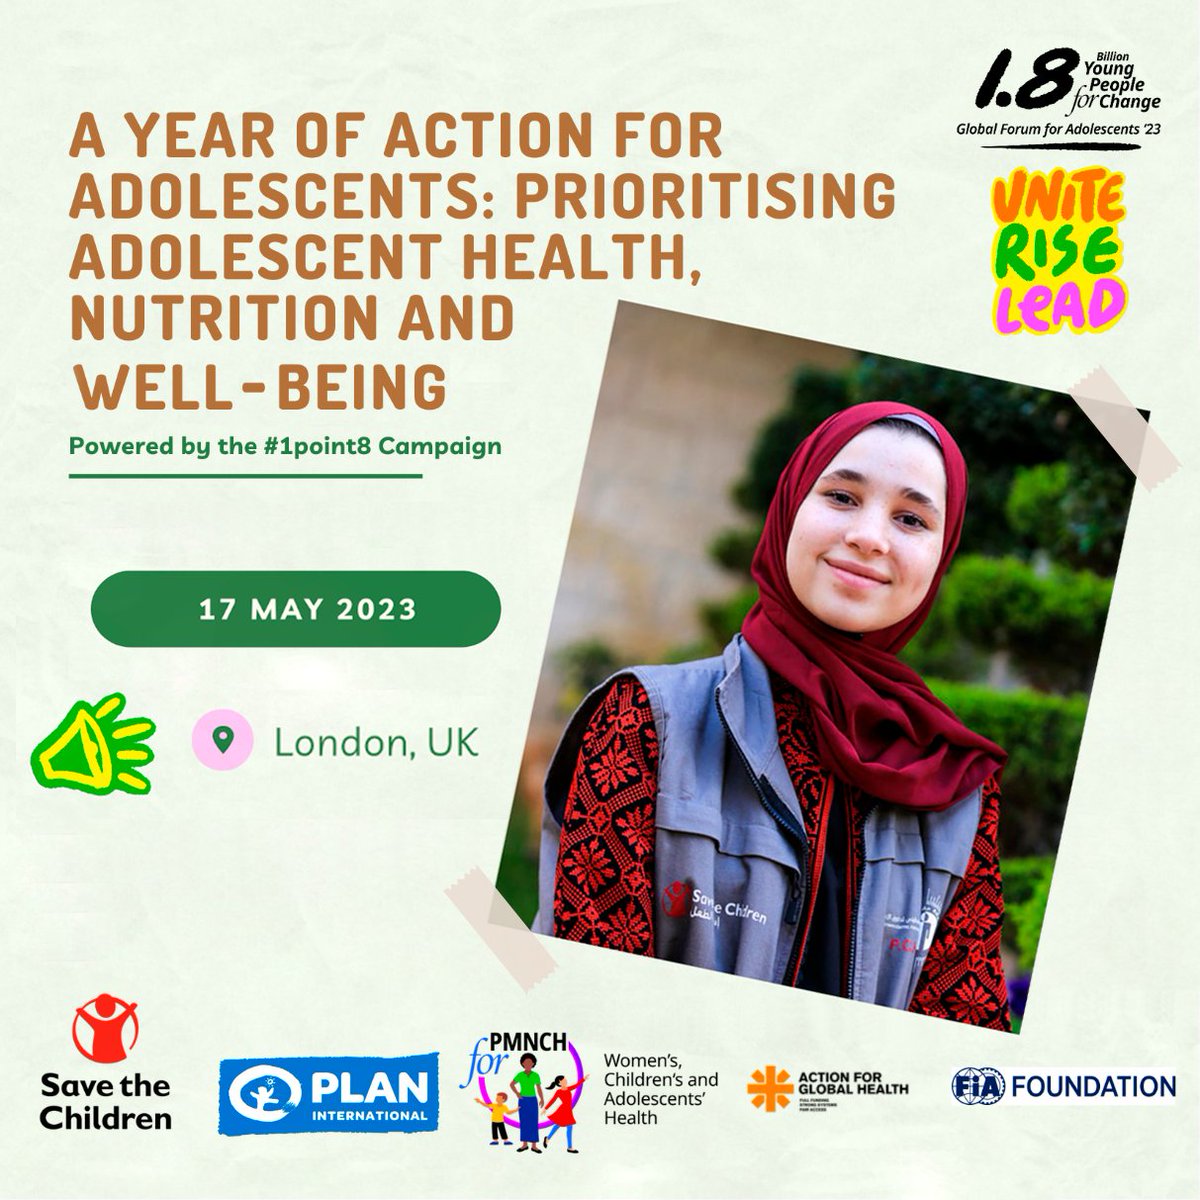 📢London-based partners: Join us for a #1point8 event w/thought leaders, technical experts & youth activists in a dialogue to accelerate progress in health & well-being for young people. 🗓 May 17th 12:30pm BST in-person in London Register: 👉🏽bit.ly/41xHEJr